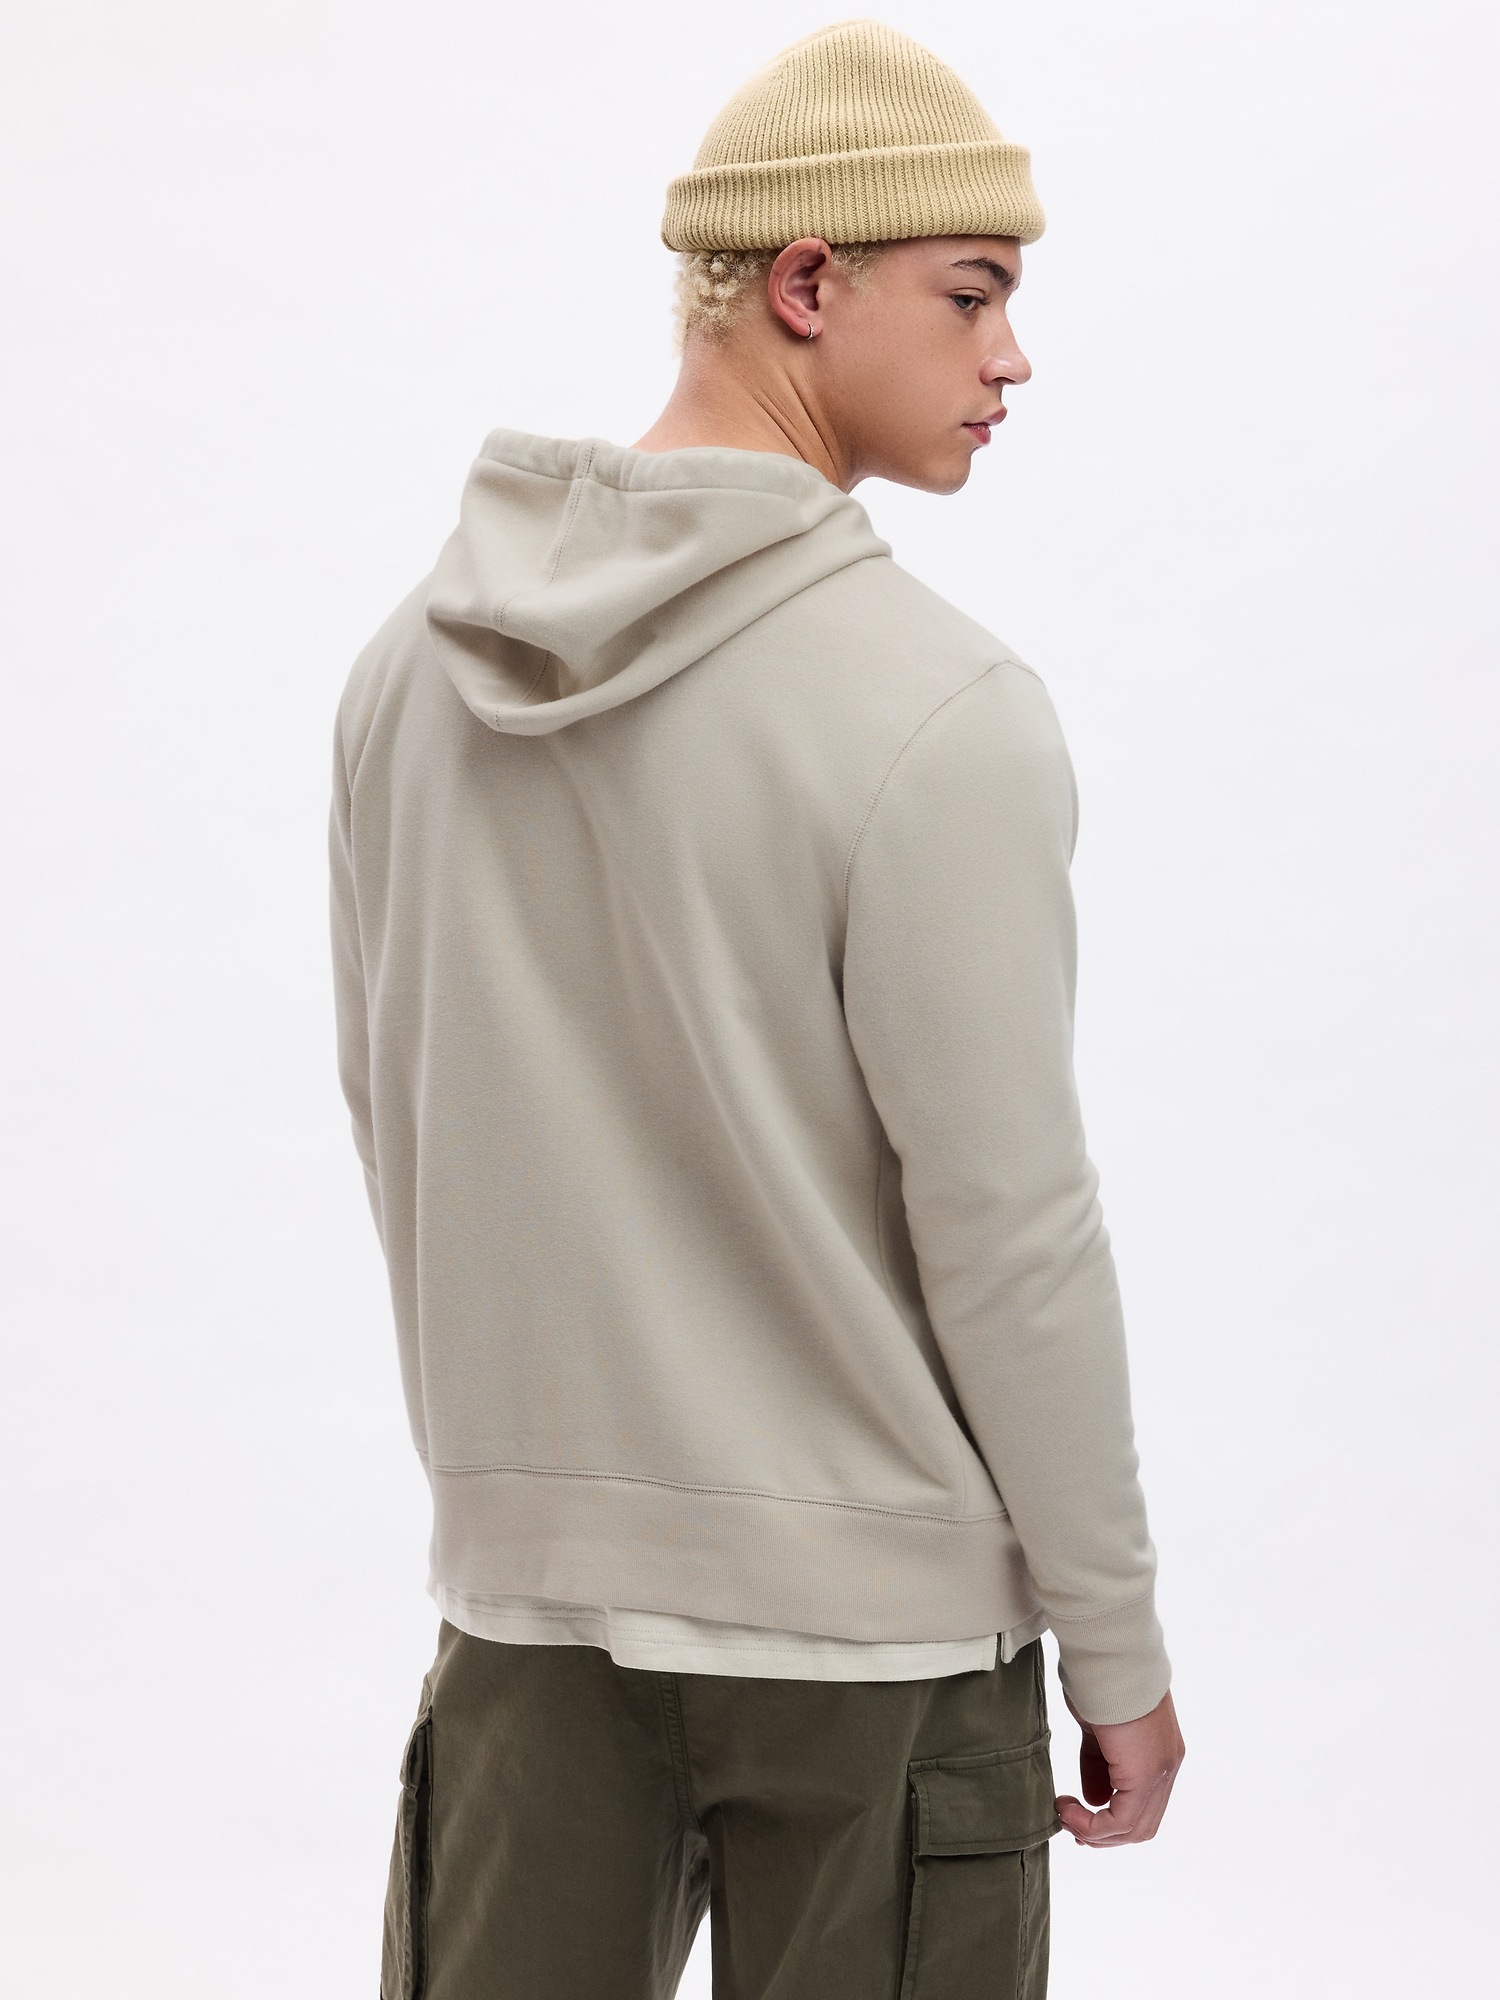 ASOS DESIGN knit hoodie with pocket front detail in gray - part of